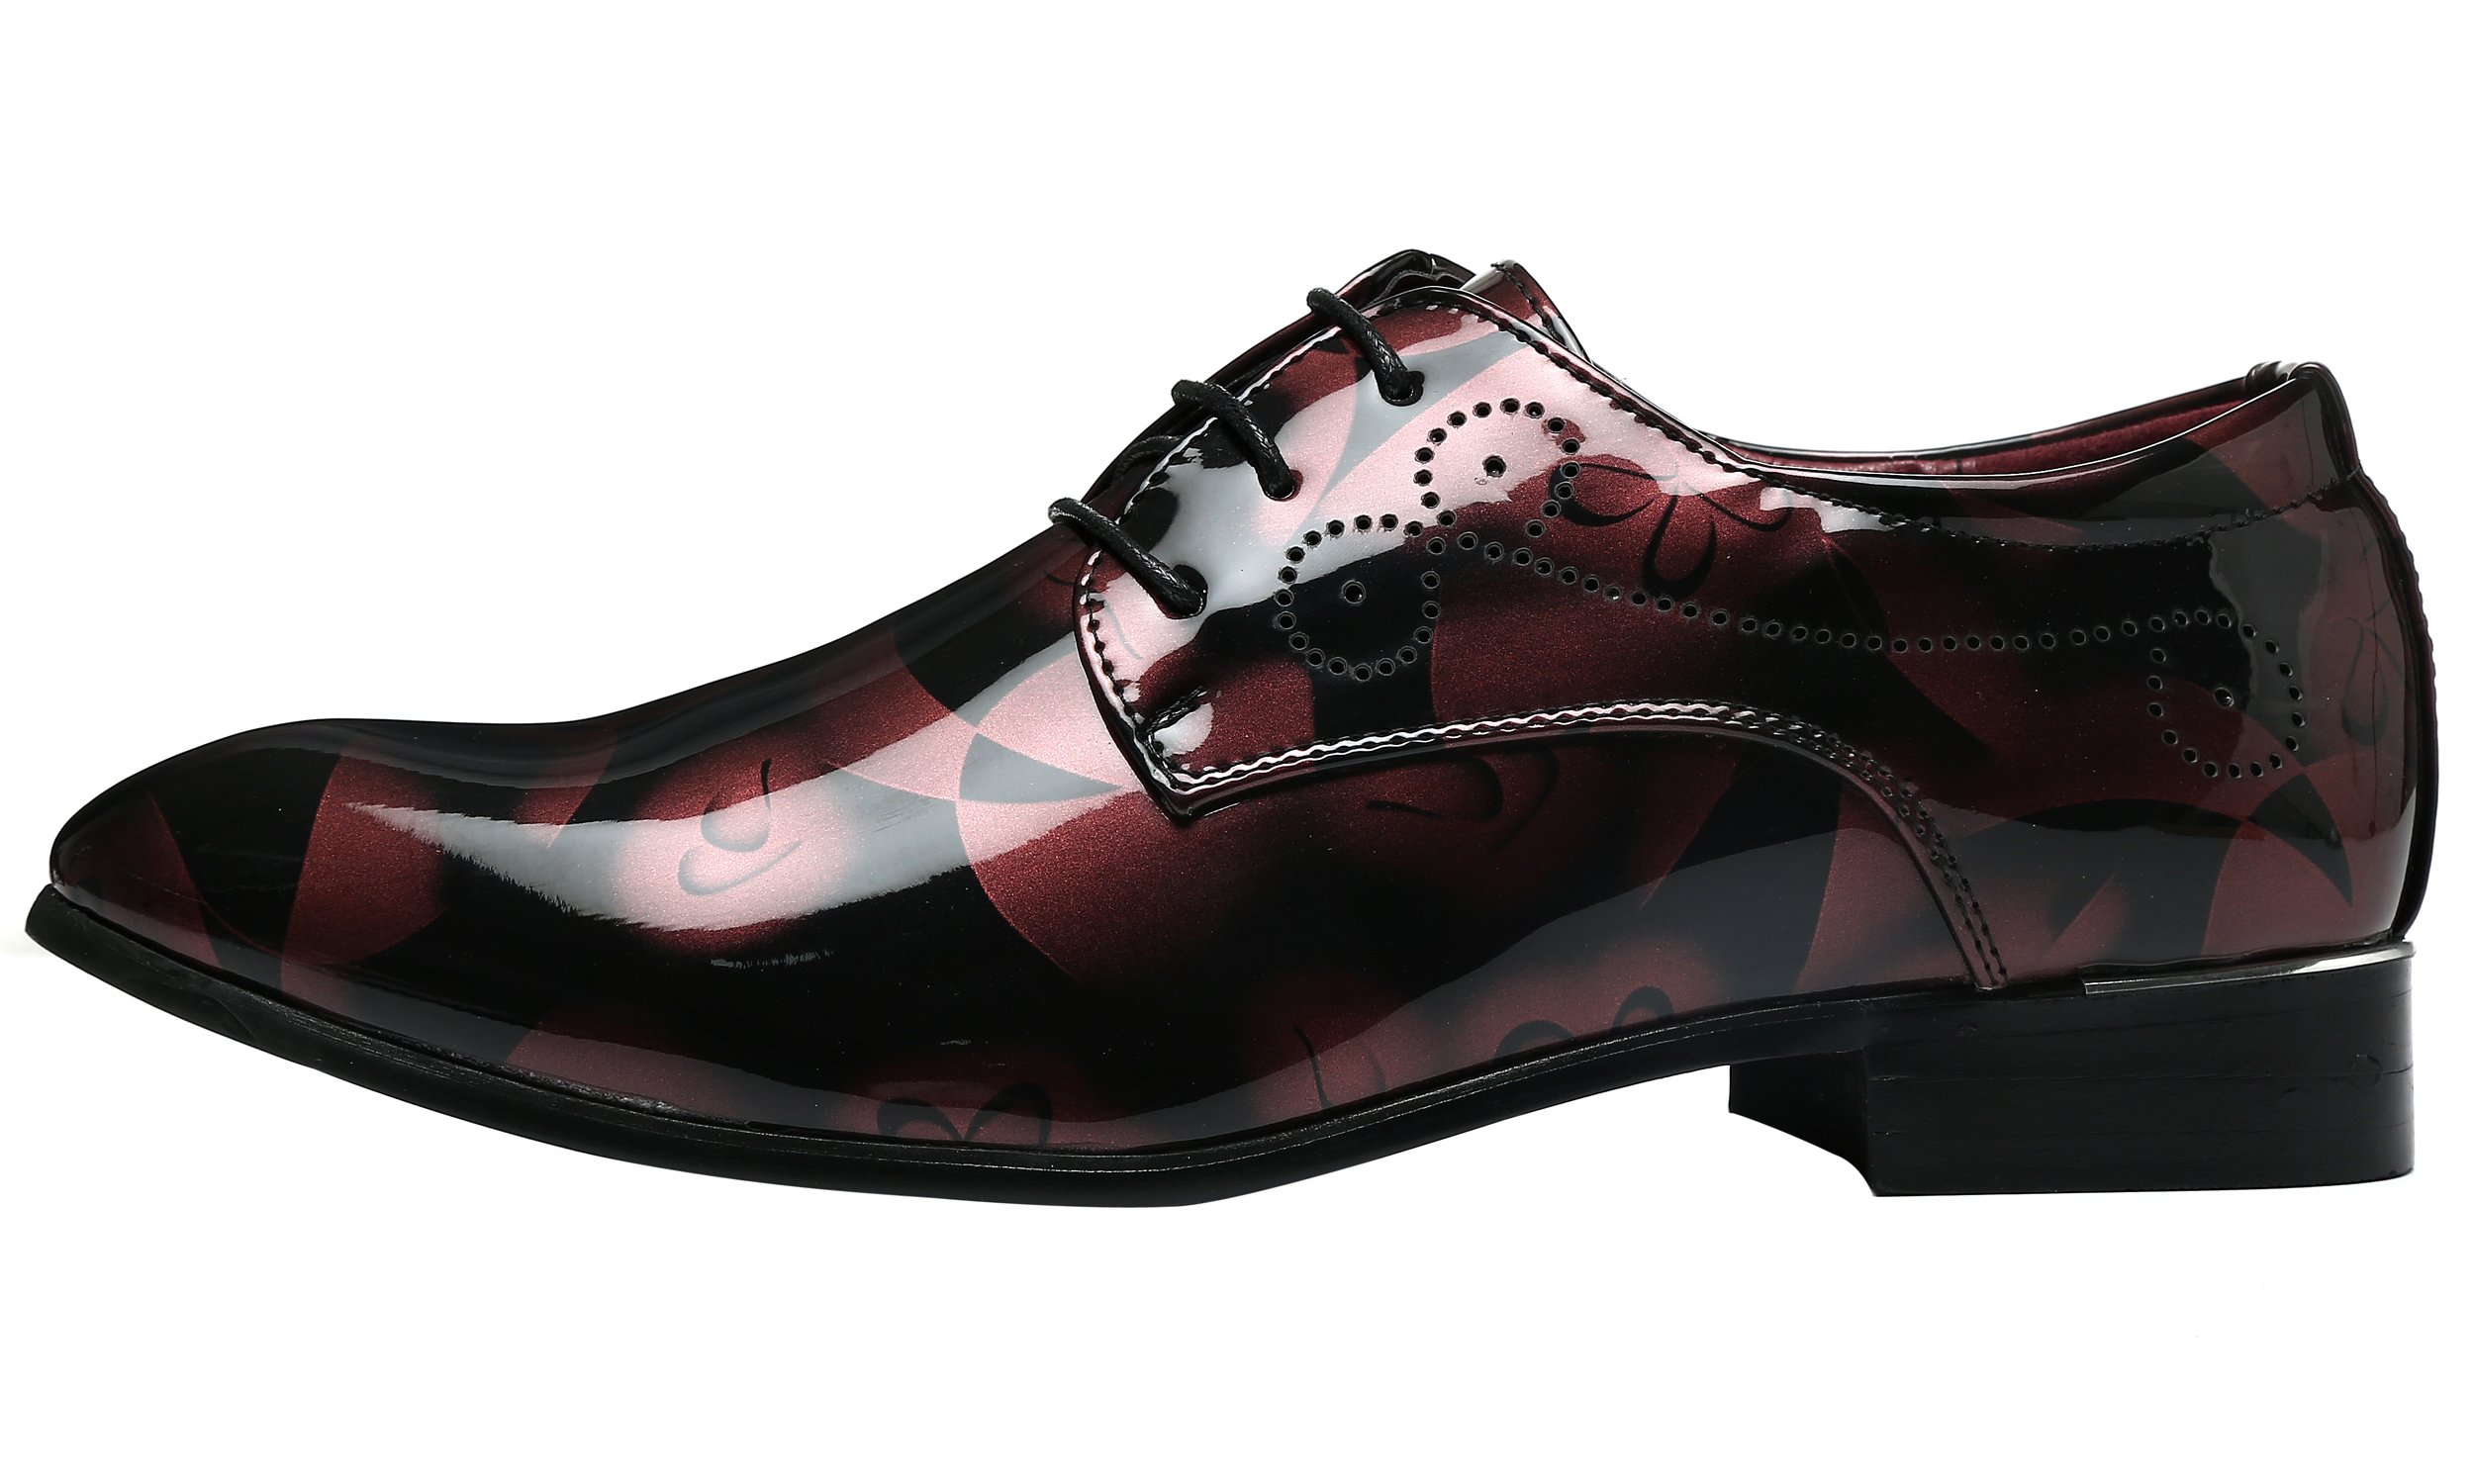 Men Fashion Shoes Dress Pointed Toe Floral Patent Leather Lace Up Oxford Black Brown Red Grey